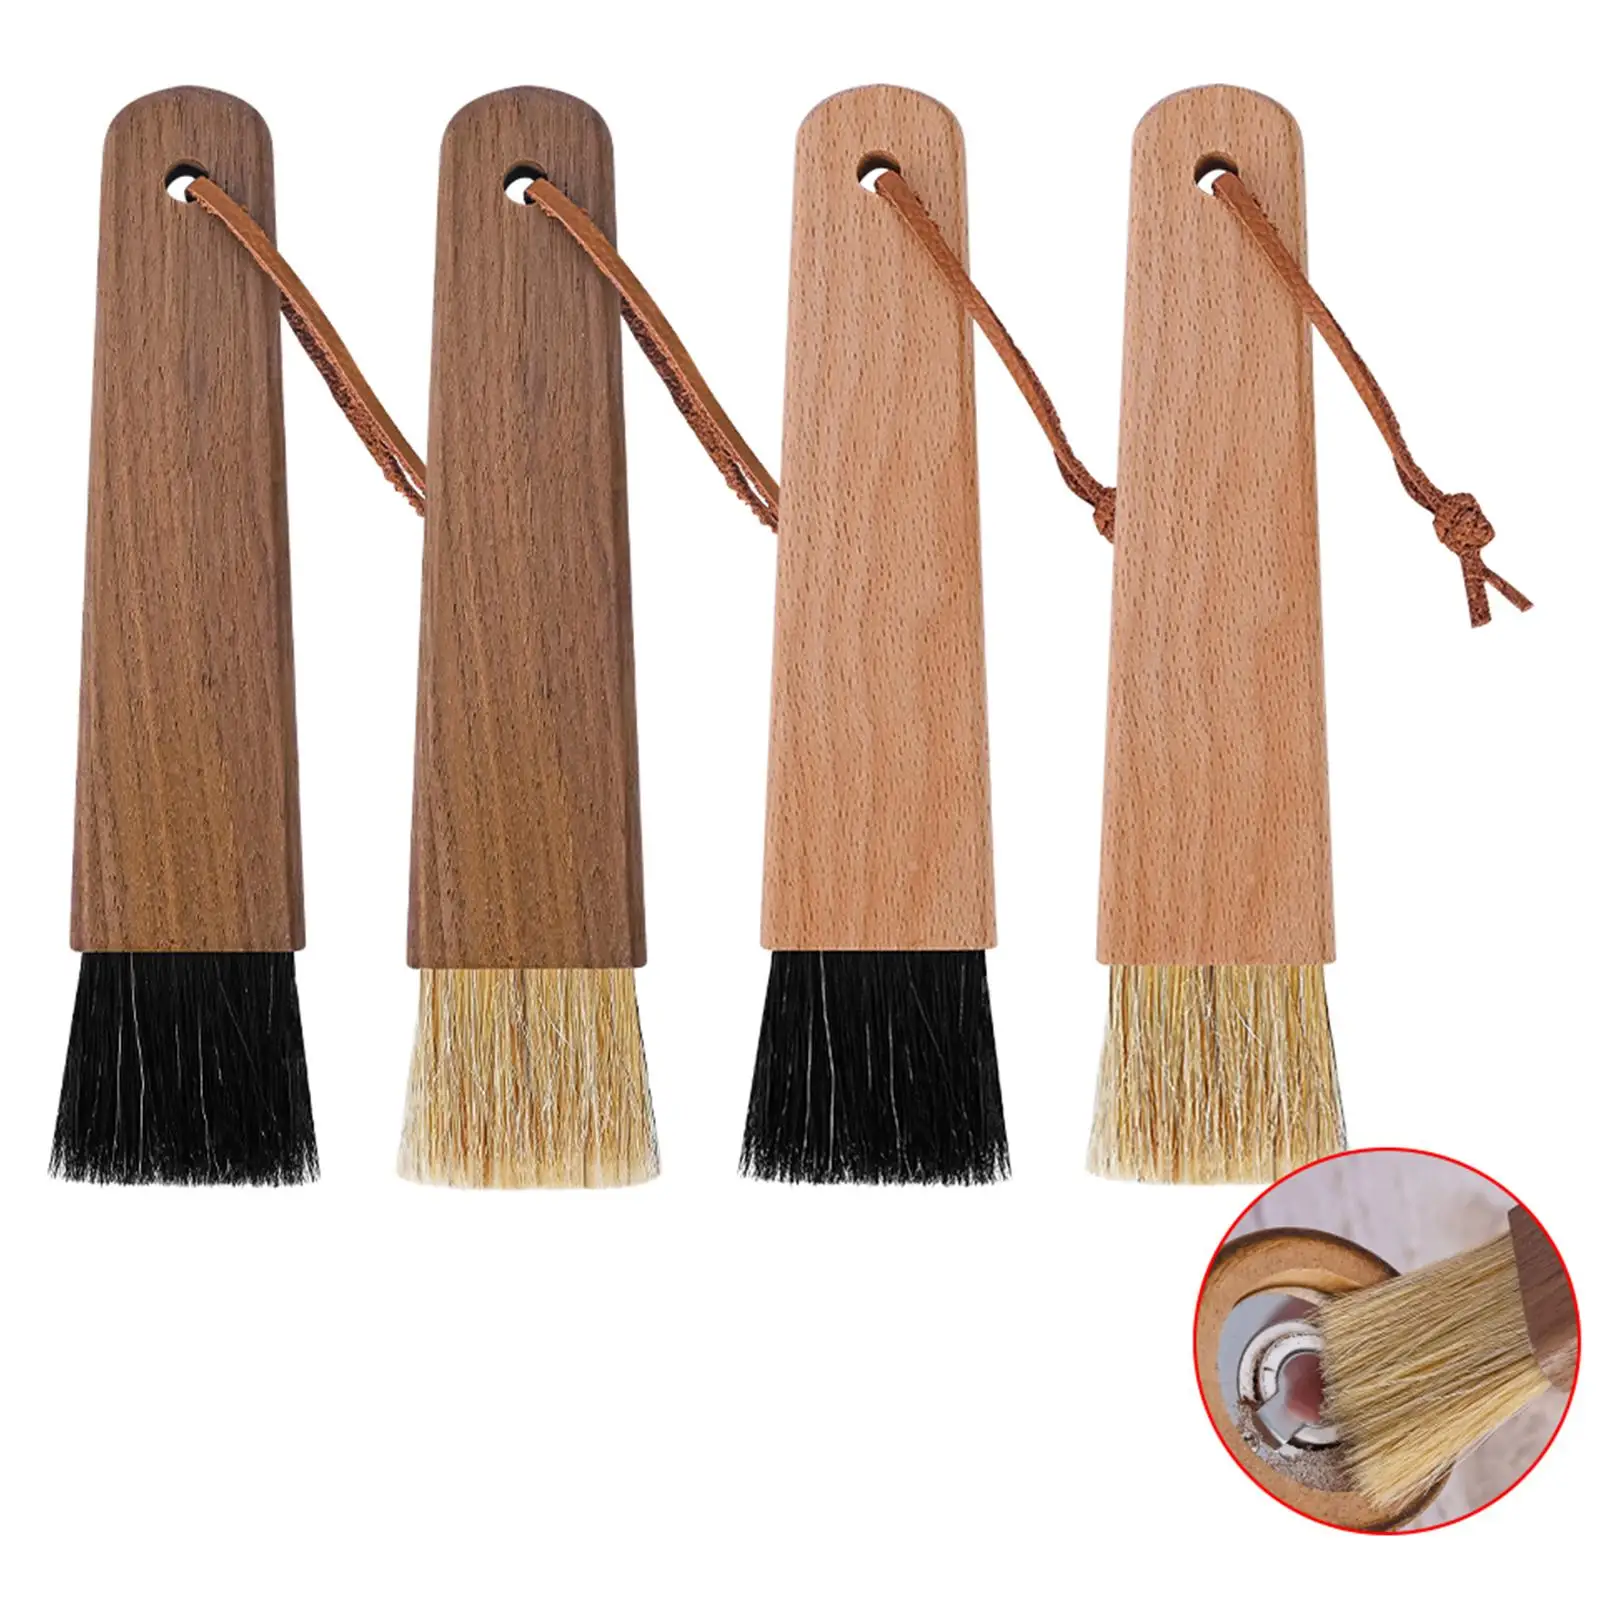 Dusting Brush Tool Espresso Accessories Supplies Easy to Wash and 